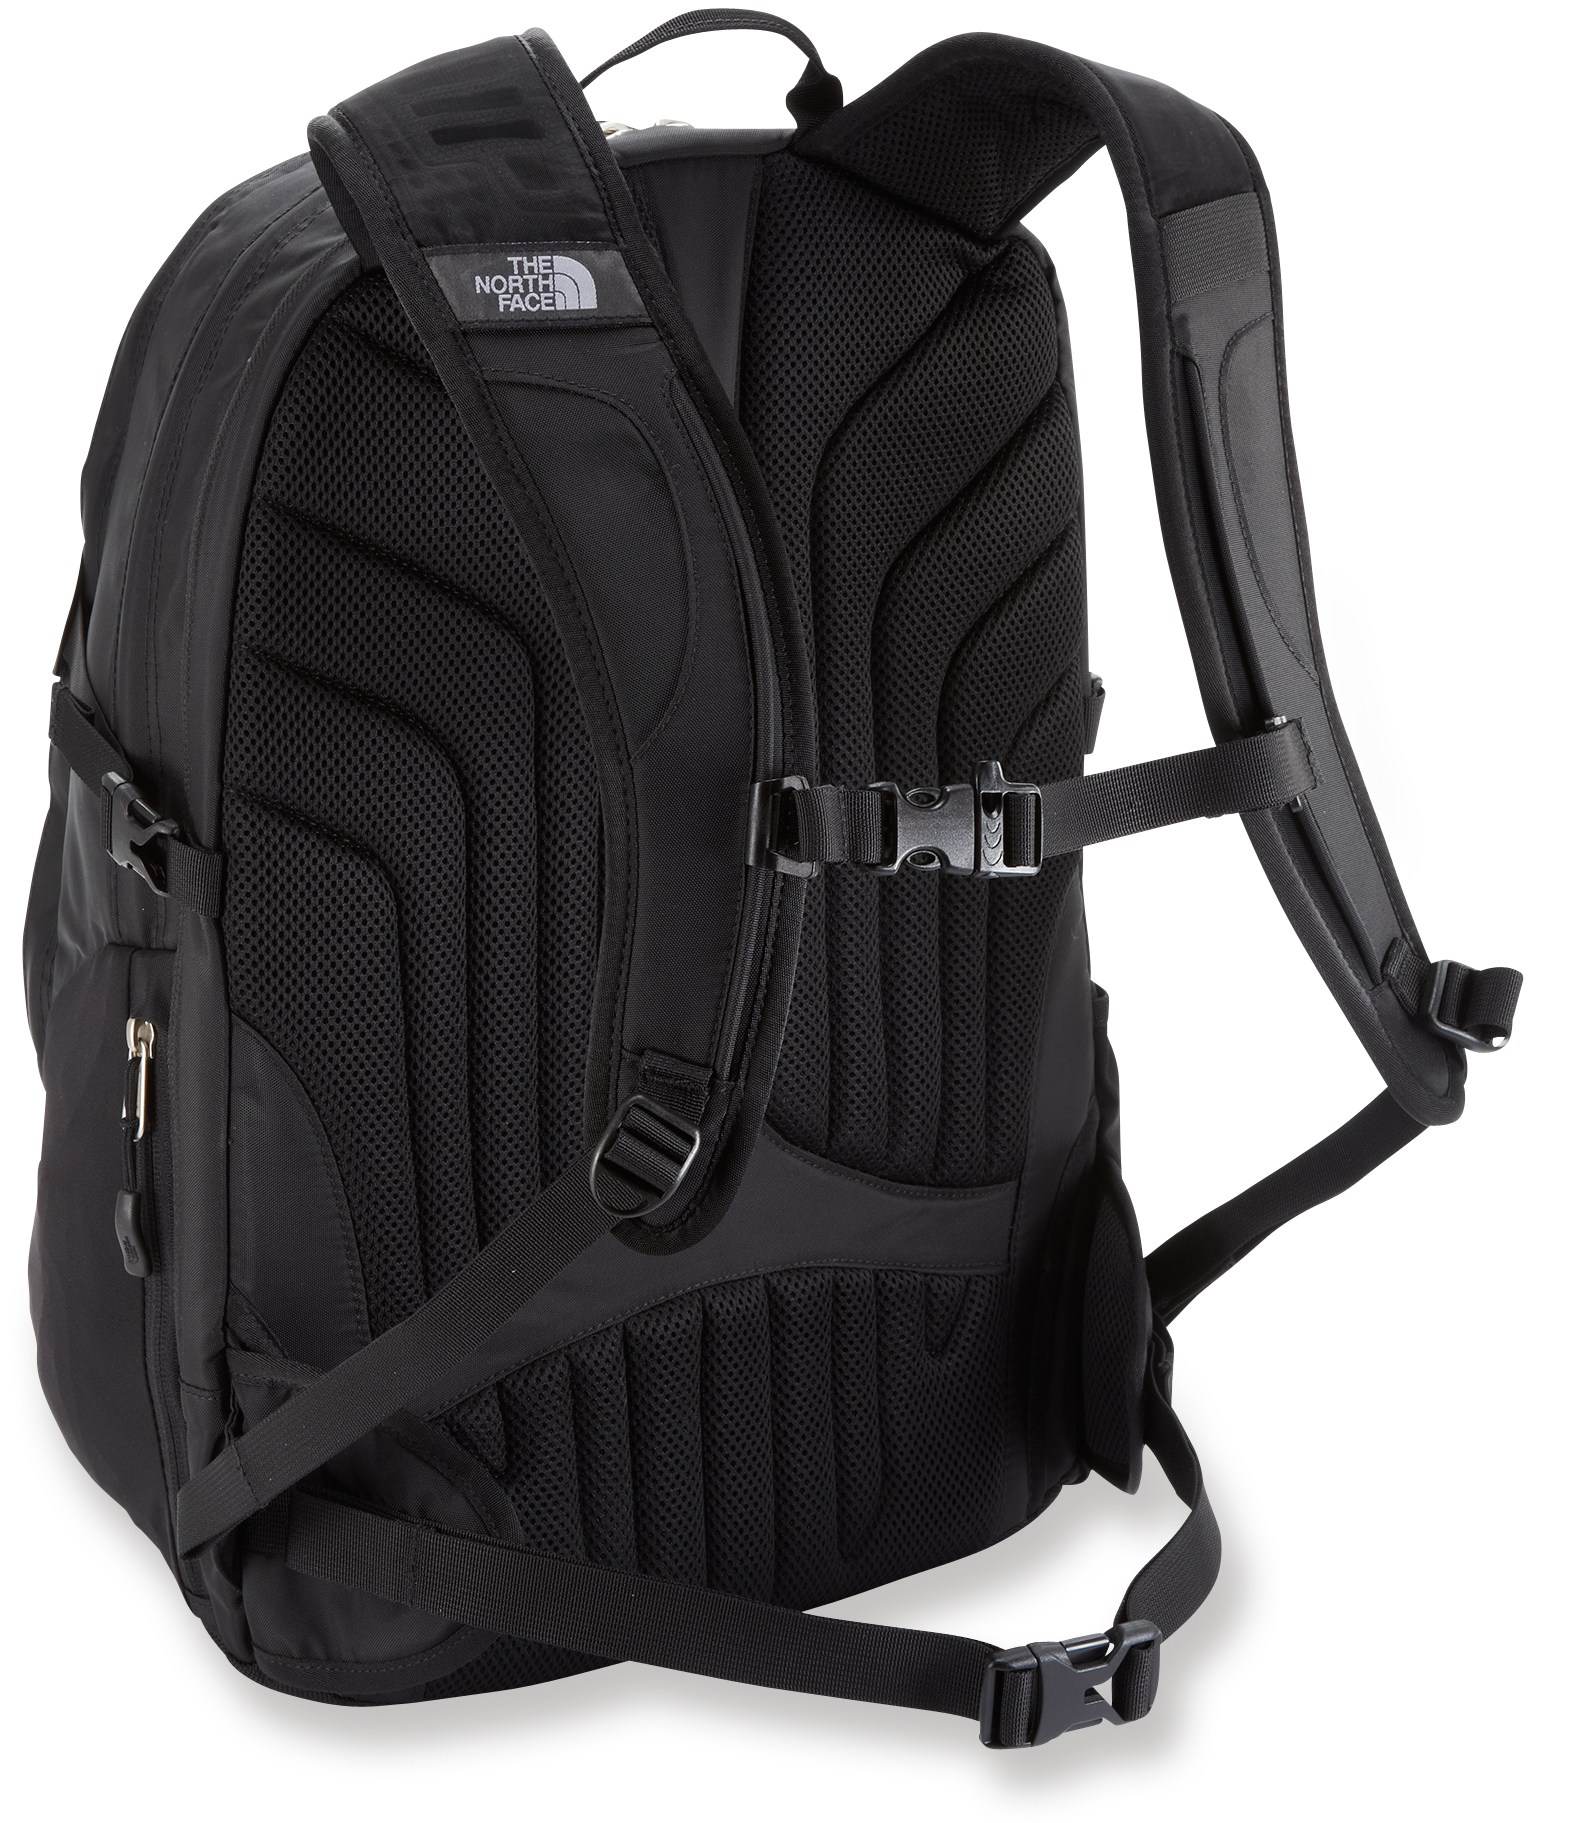 The North Face Surge II Backpack The North Face ktmart.vn 9